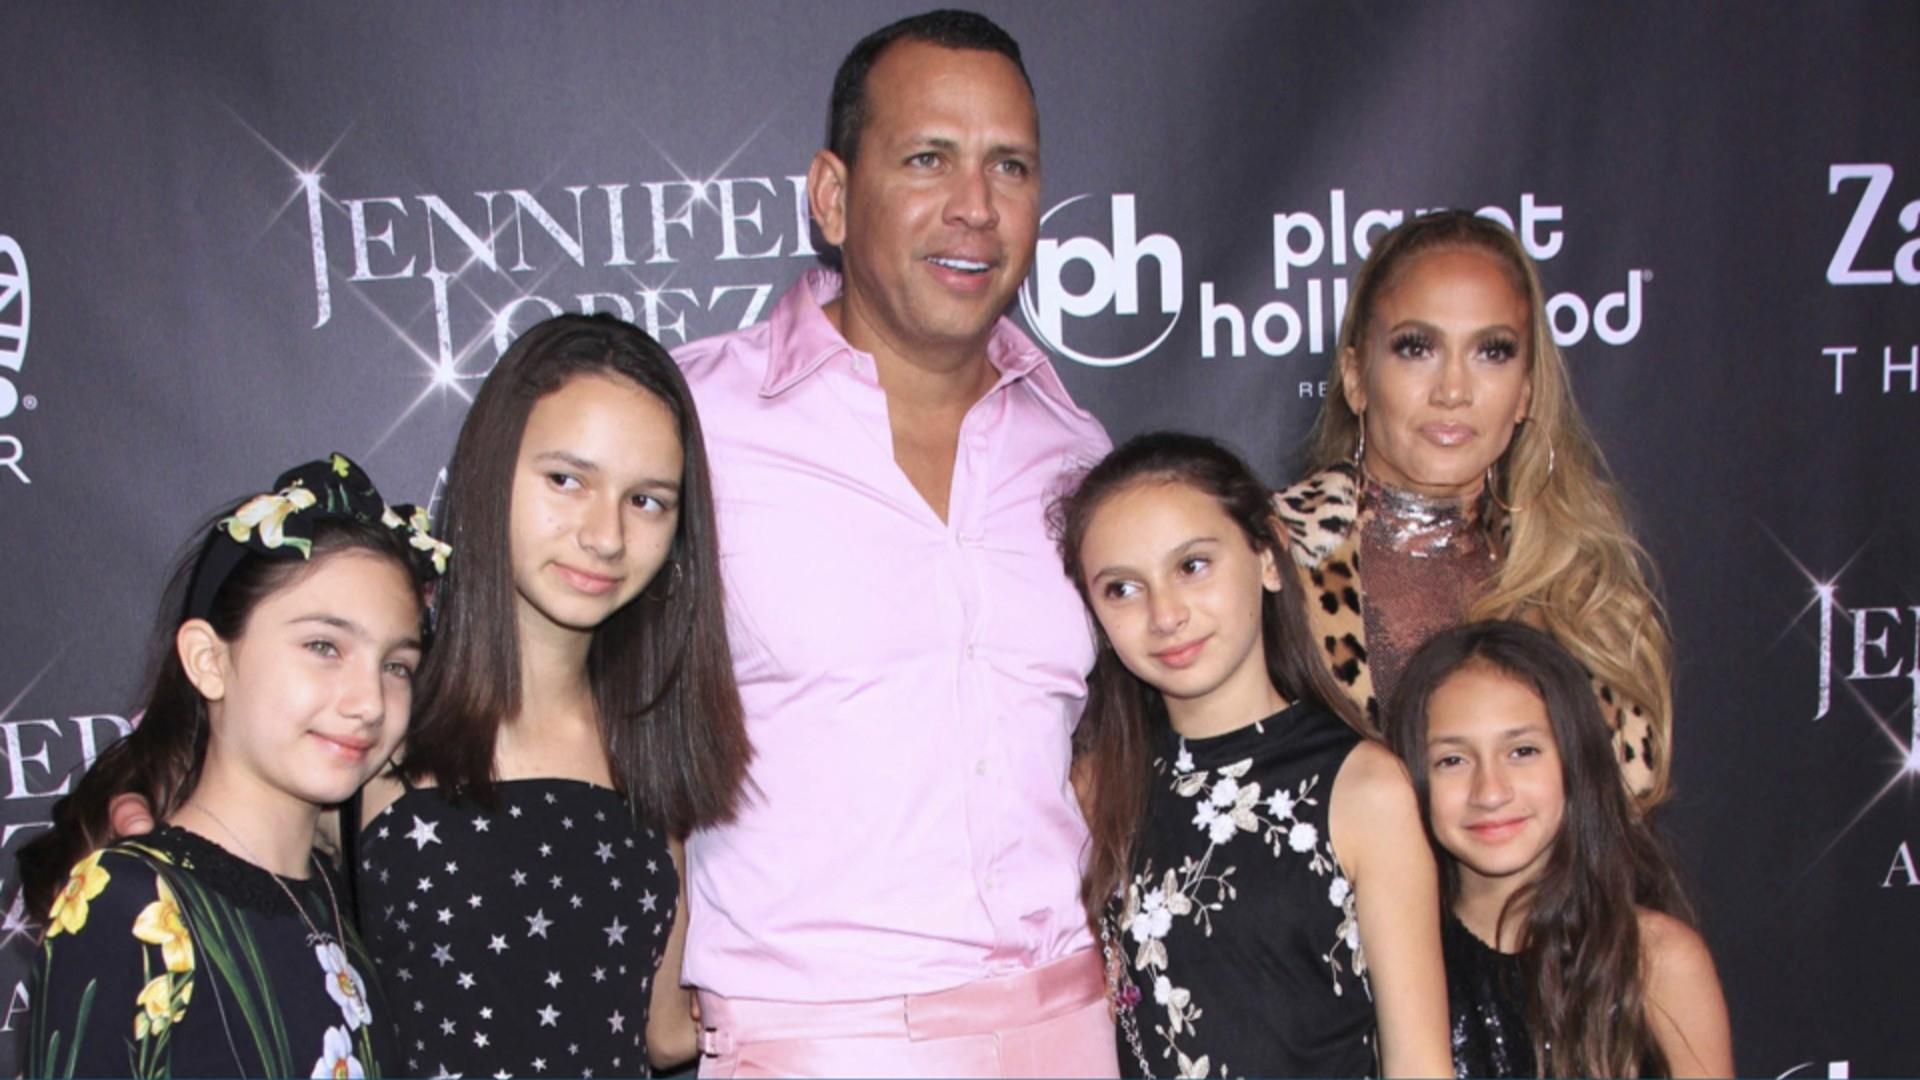 J Lo and A-Rod Spend Weekend With Kids